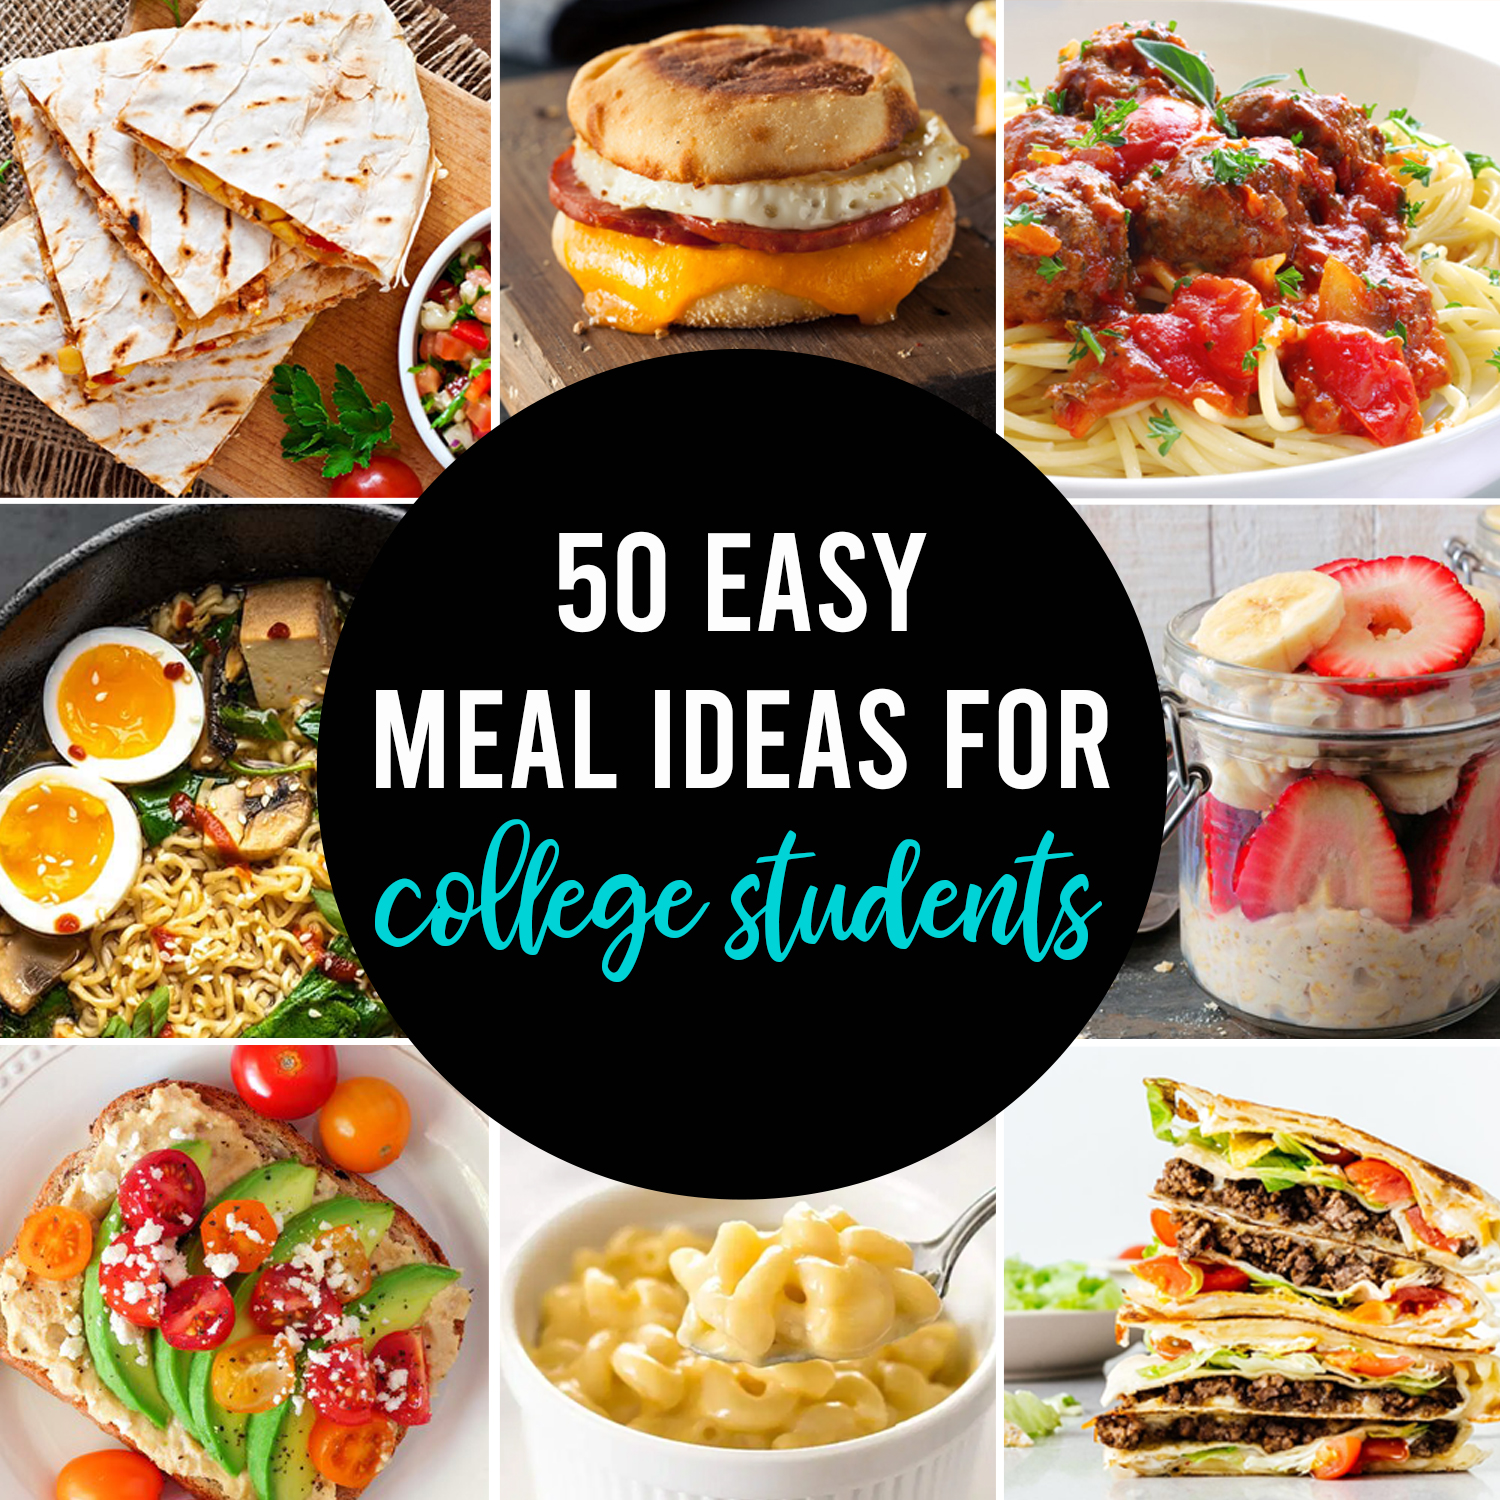 Free Food Samples for College Students